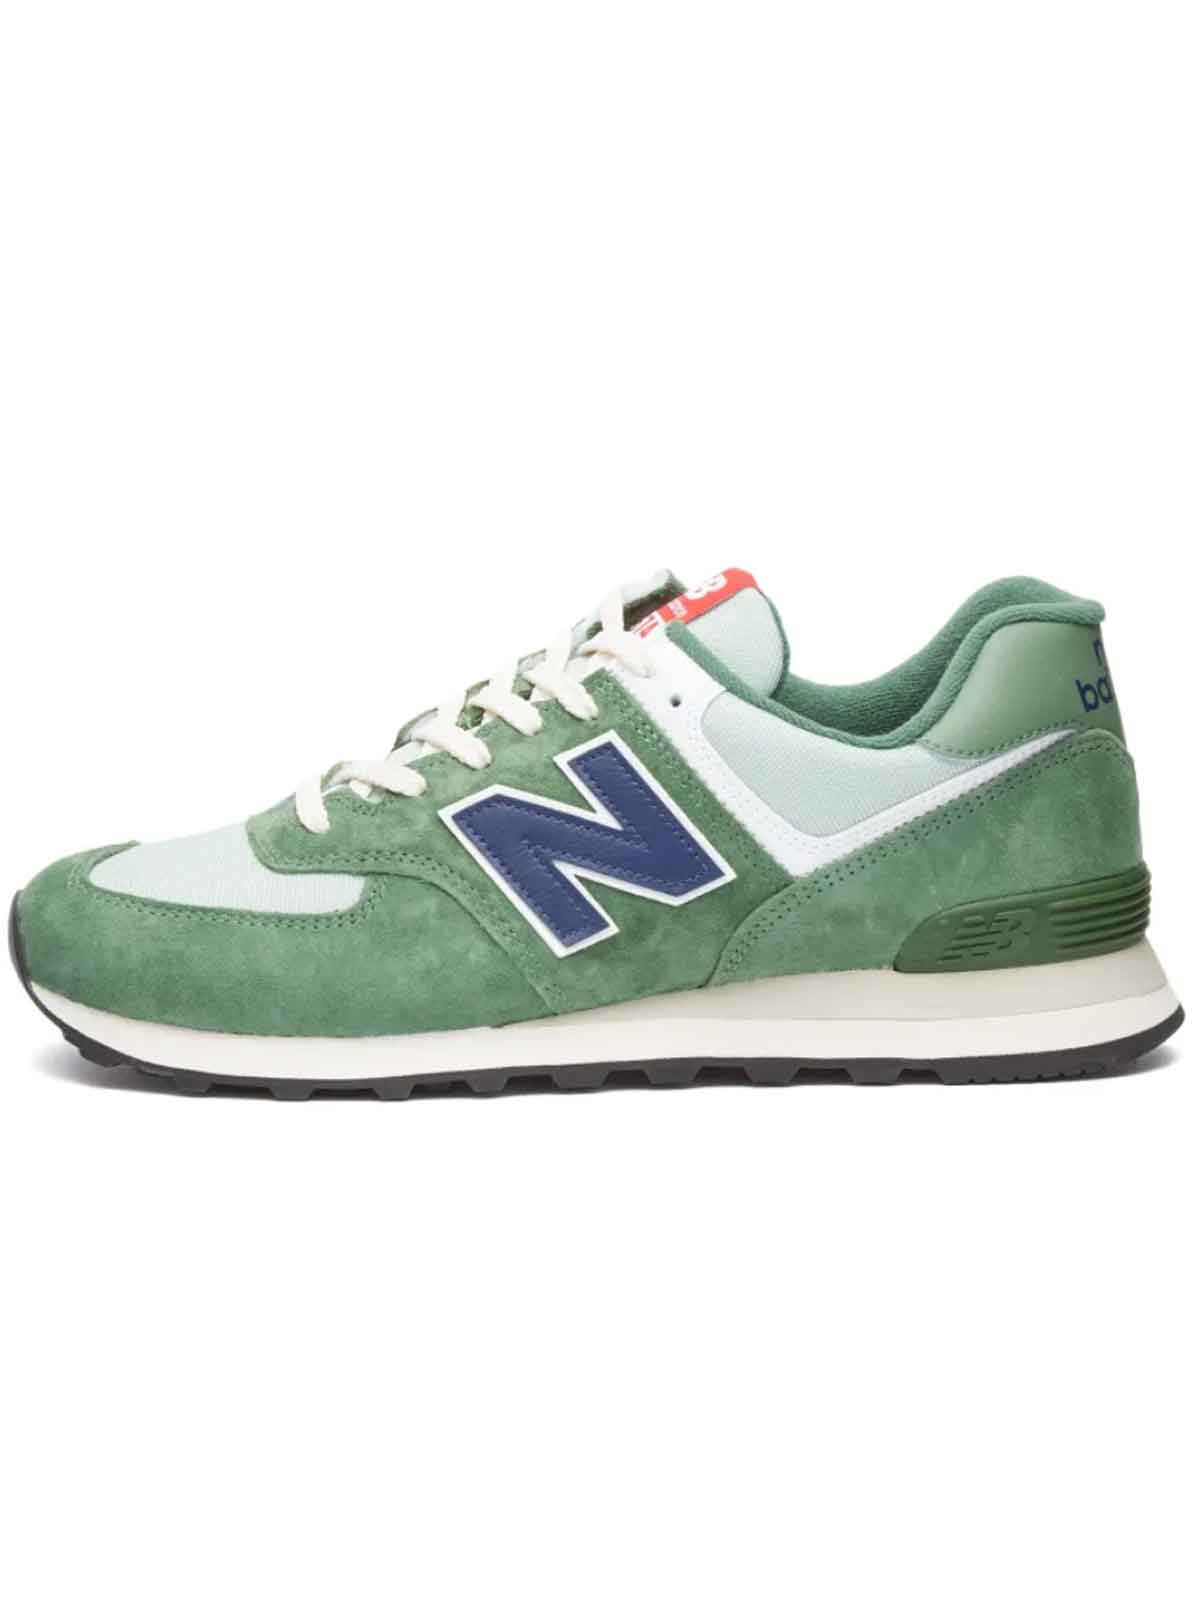   New Balance | 574 Everyday Sneakers |  